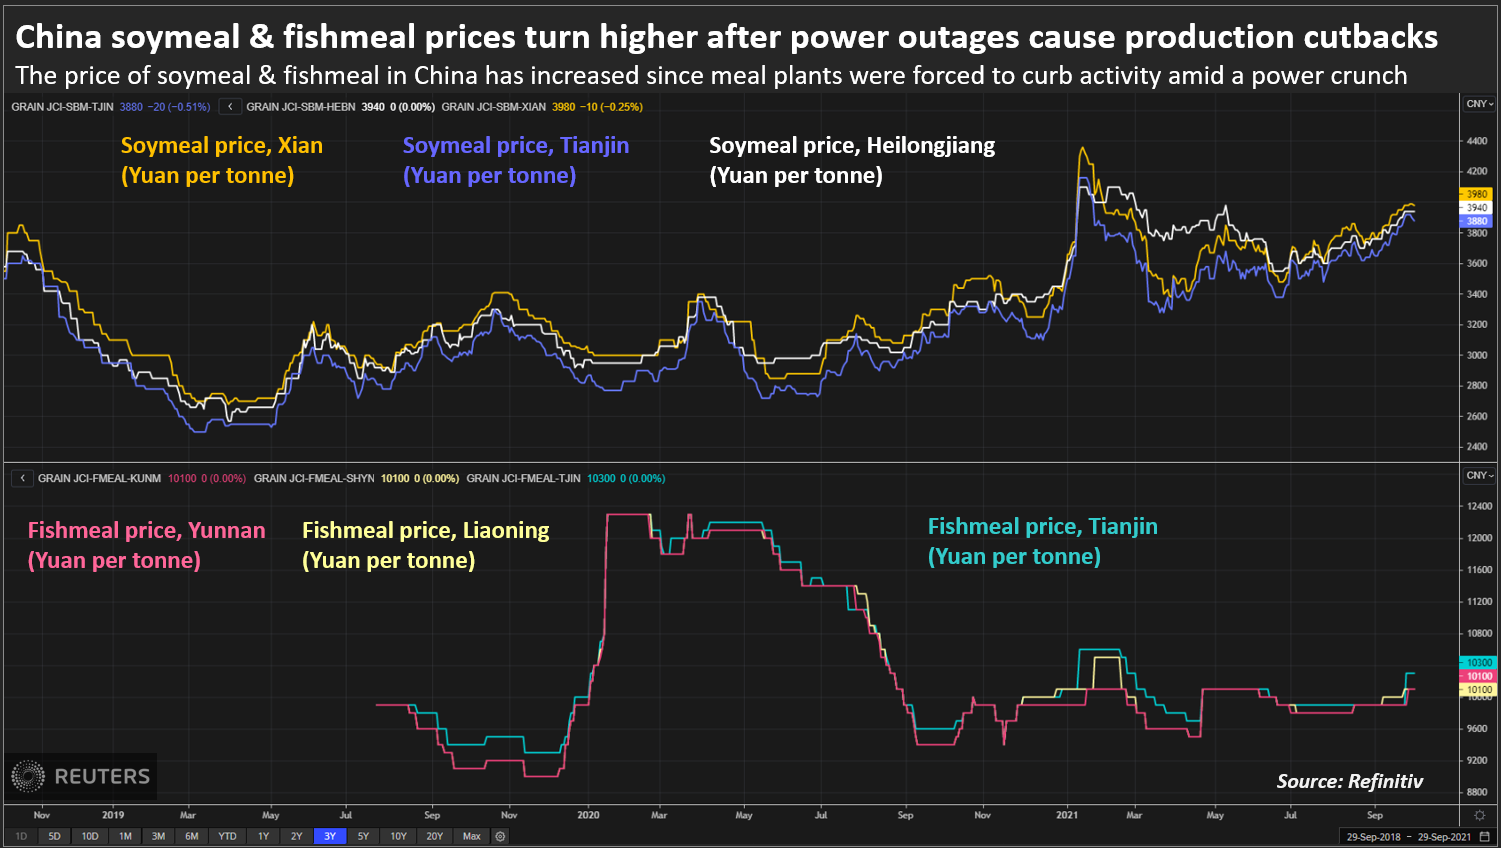 China soymeal & fishmeal prices turn higher after power outages cause production cutbacks